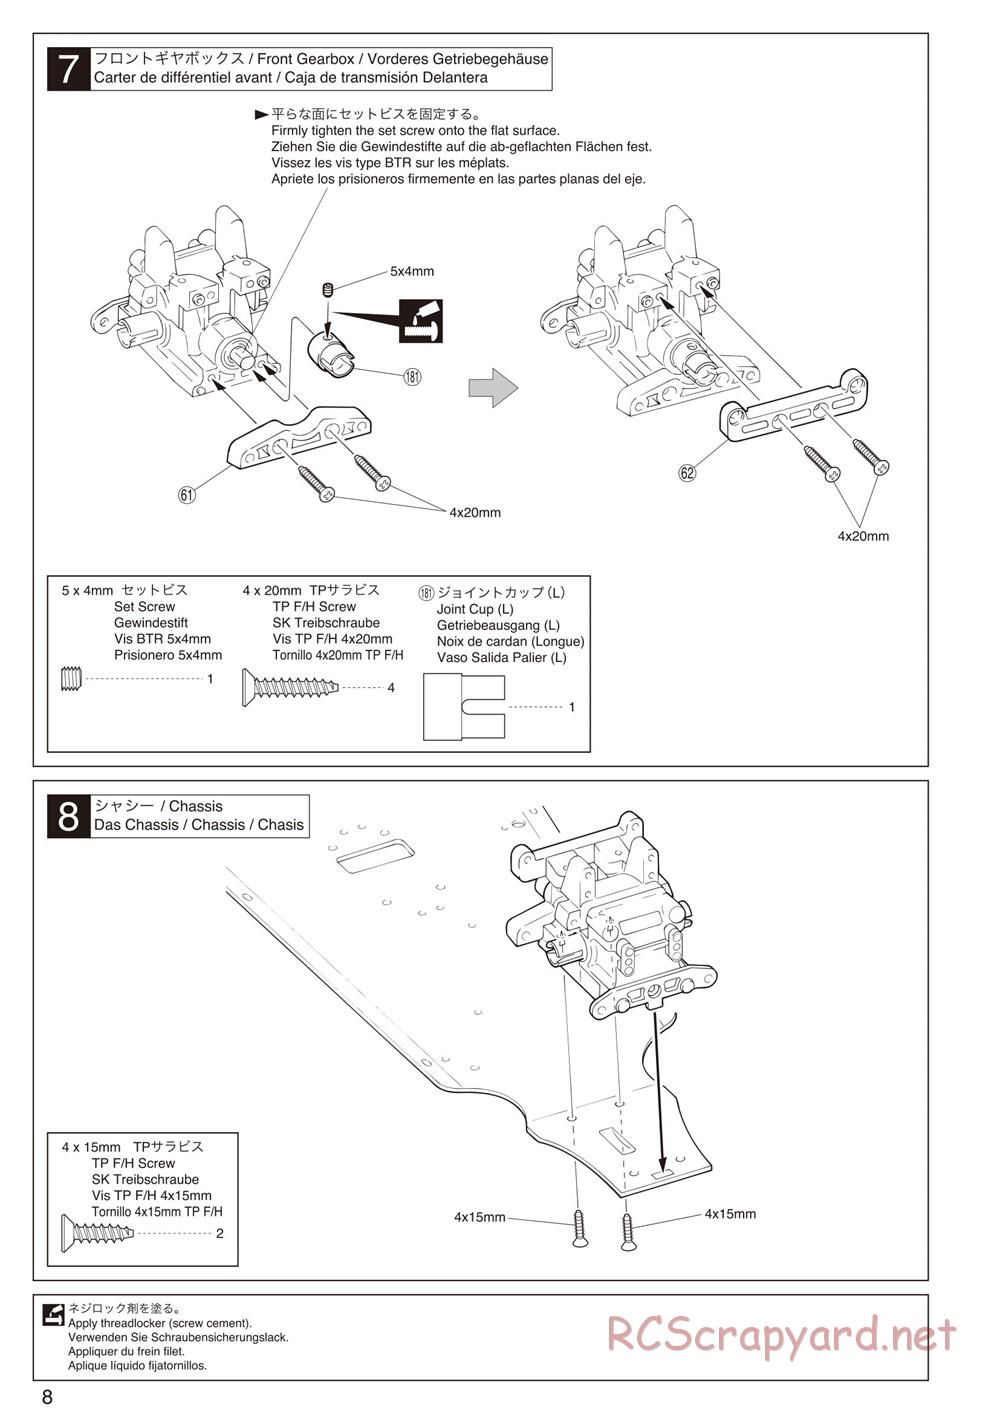 Kyosho - Inferno Neo 2.0 - Manual - Page 8